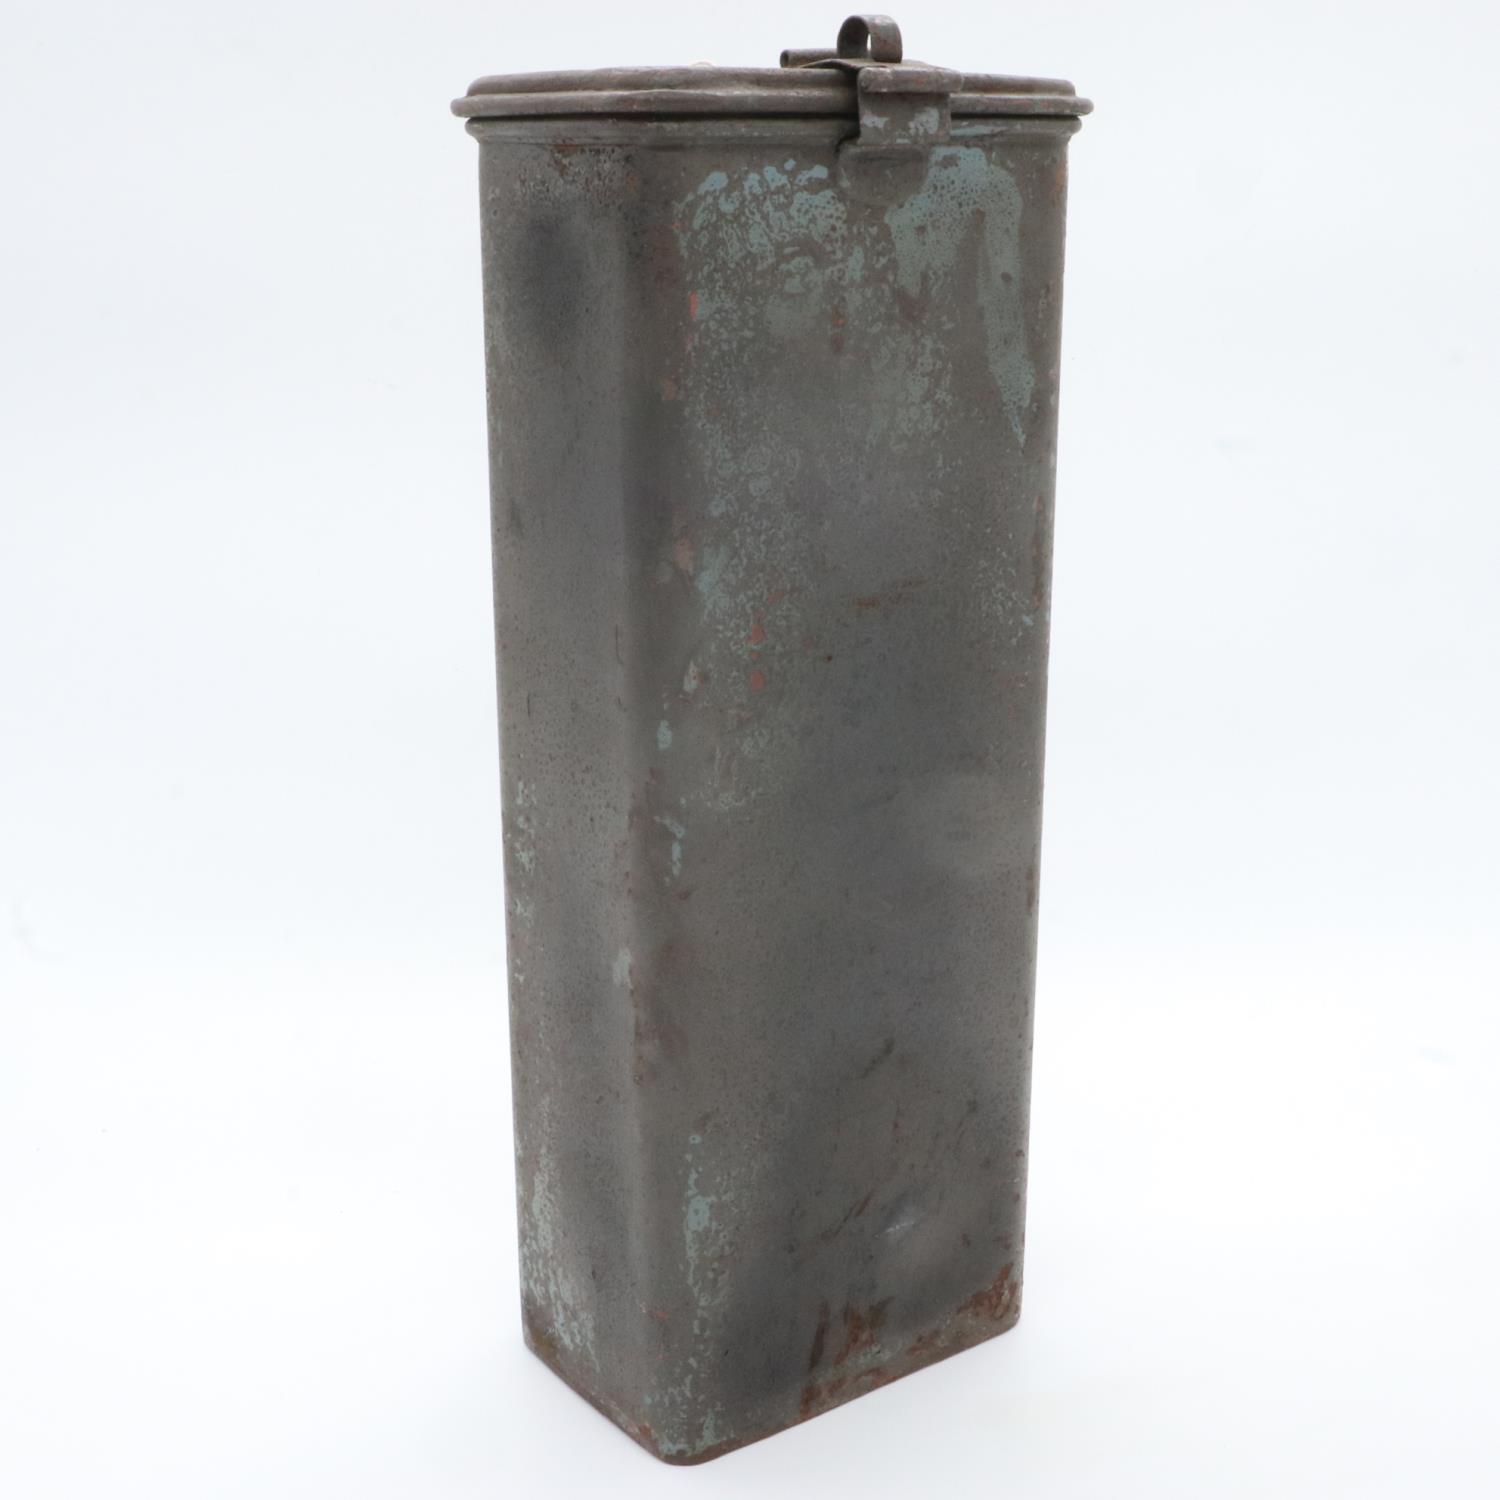 1943 Dated German Field Kitchen Coffee Container, UK P&P Group 2 (£20+VAT for the first lot and £4+